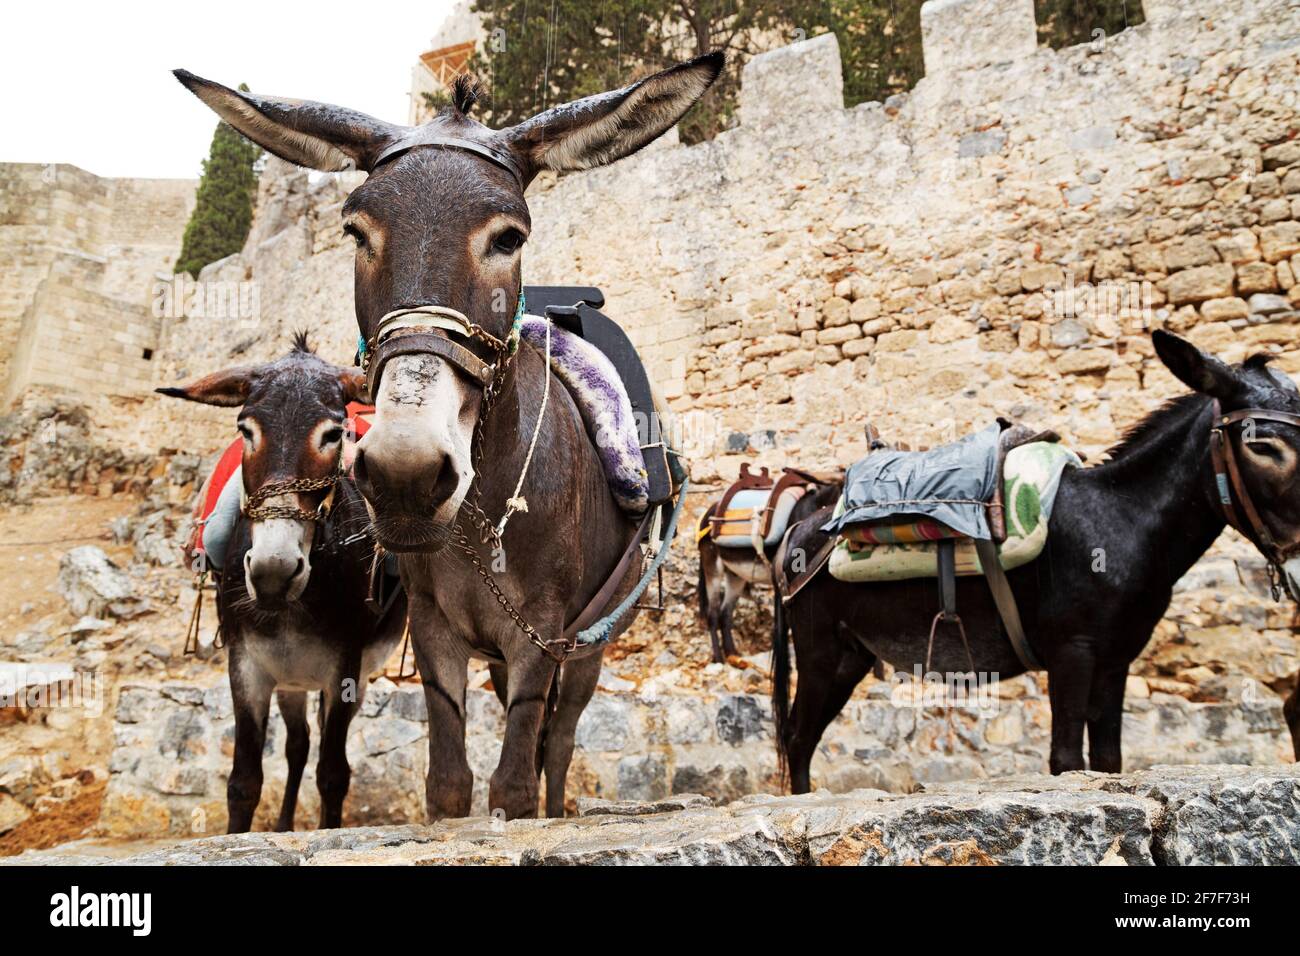 Donkeys in Lindos on the island of Rhodes in Greece. The animals are used to transport tourists through the town to and from the Lindian Acropolis. Stock Photo